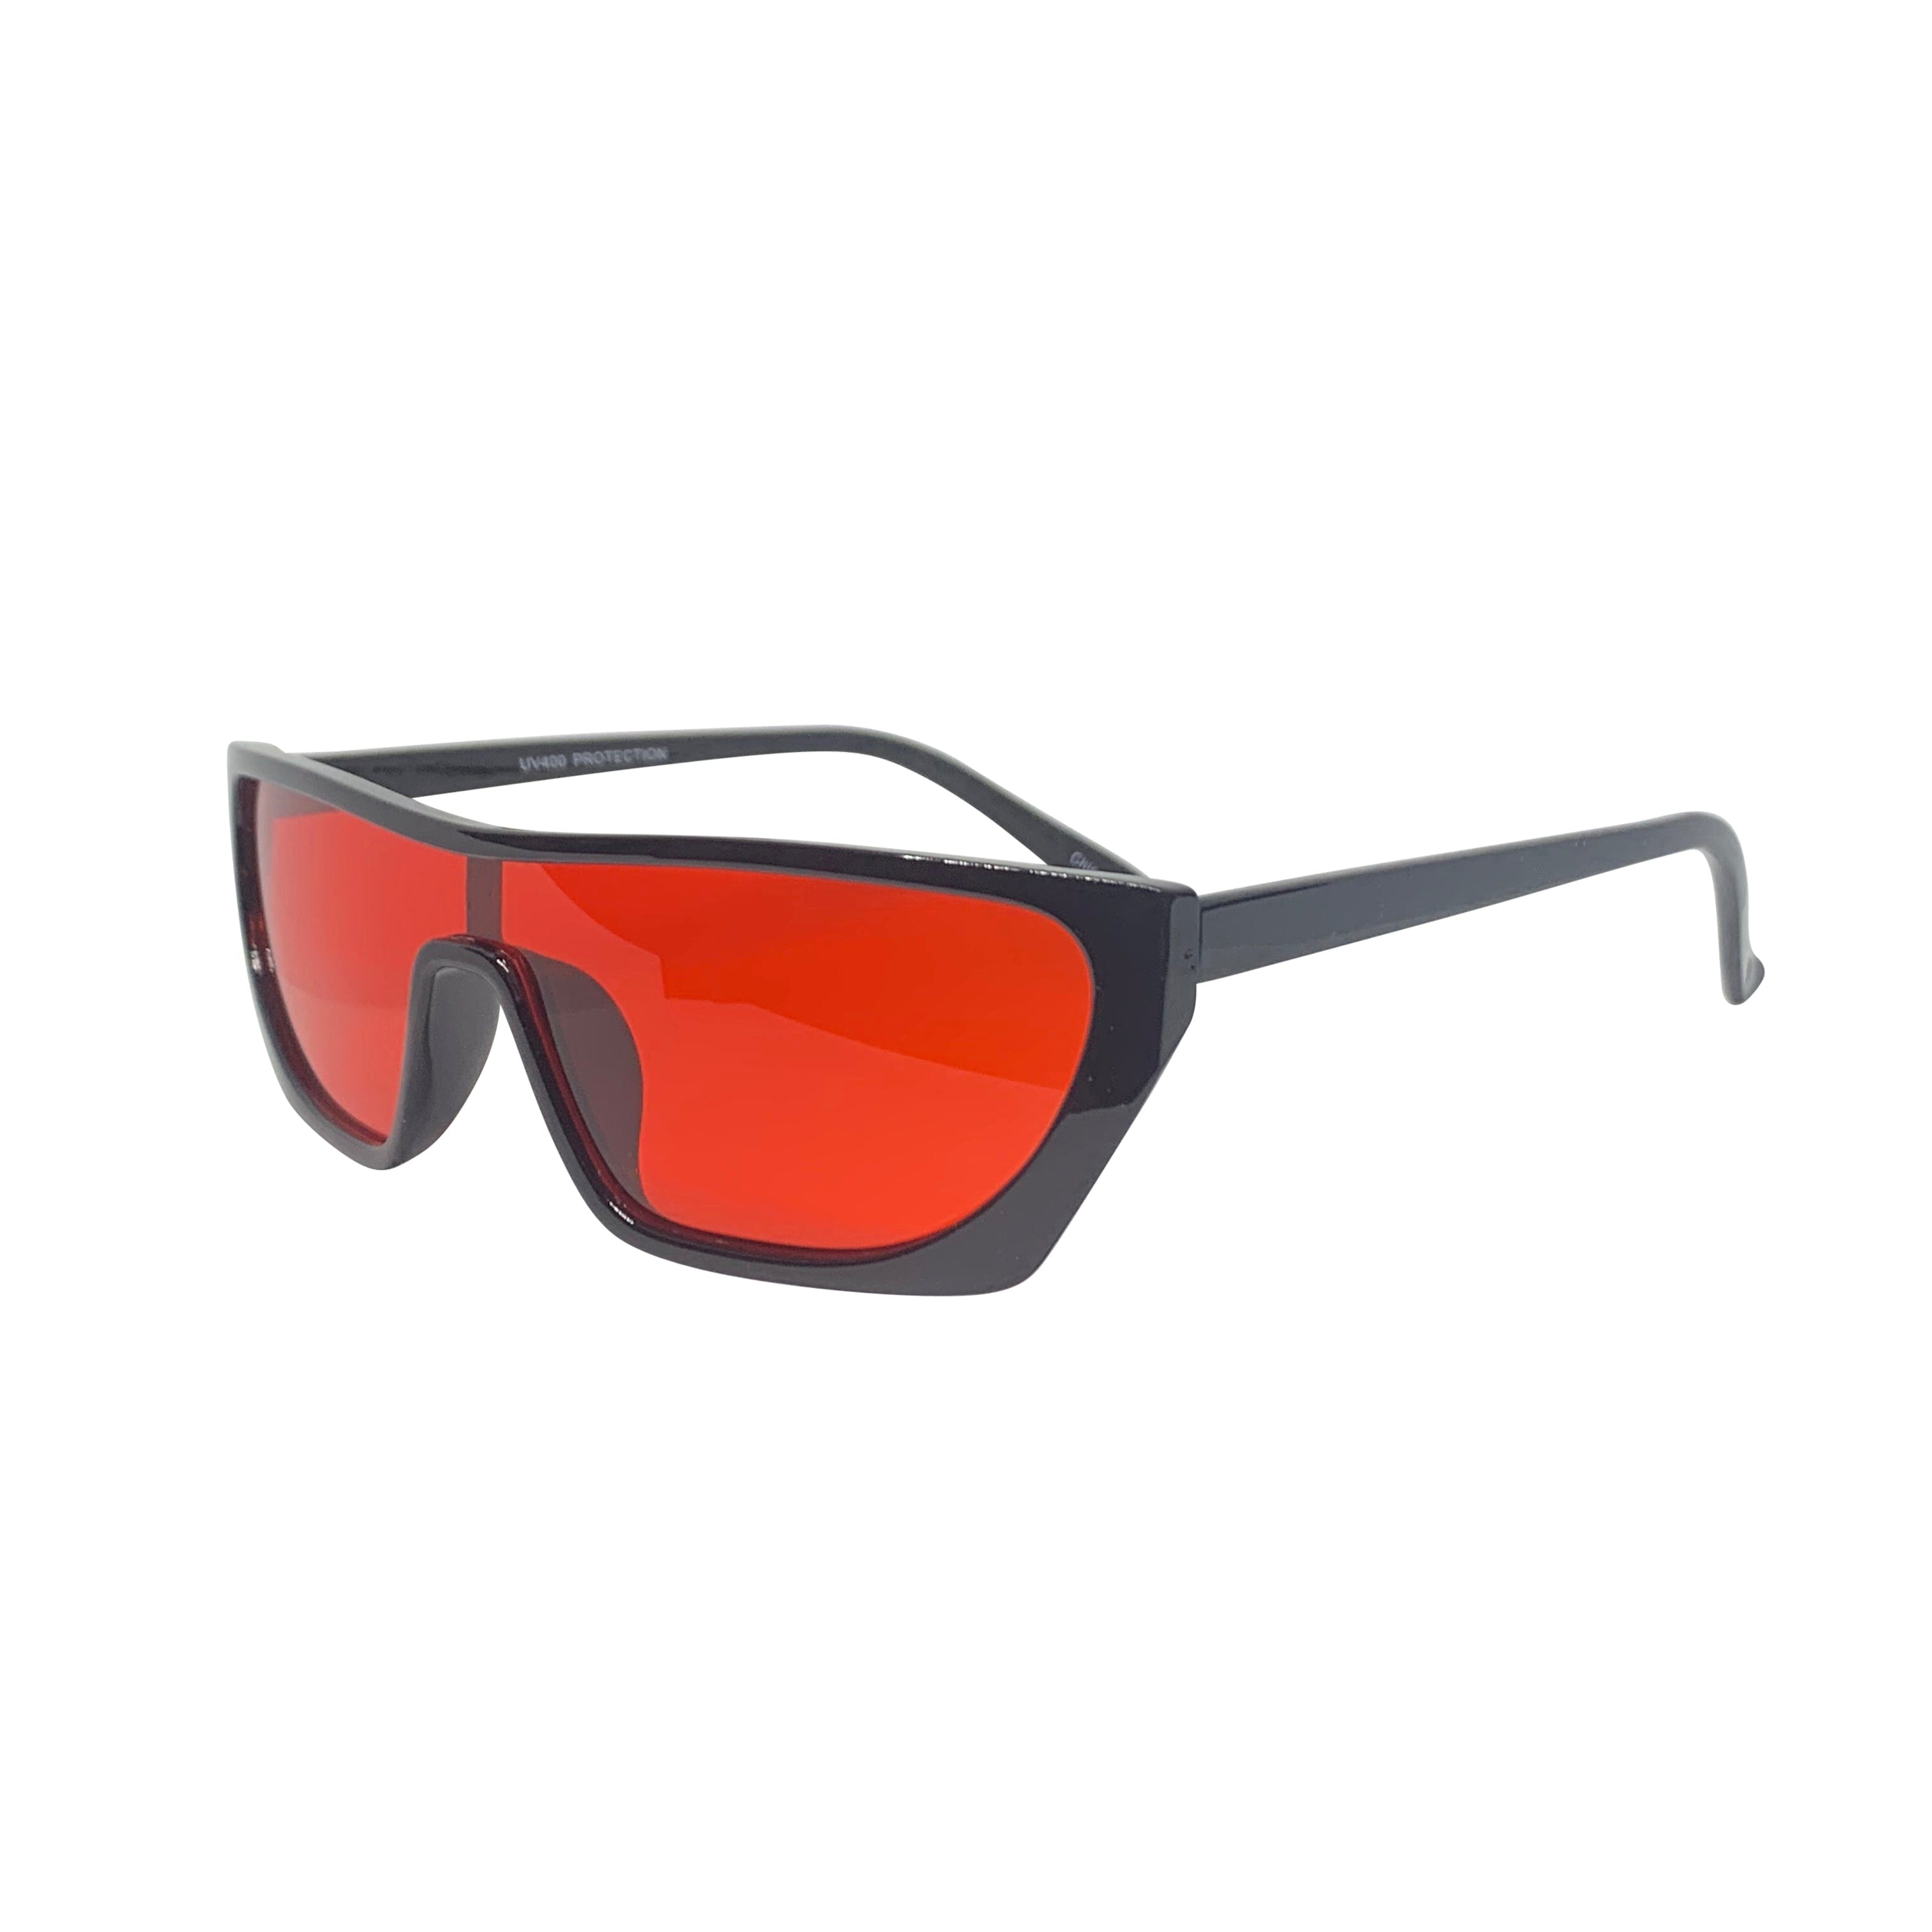 PAPI Red and Black Shield Sunnies